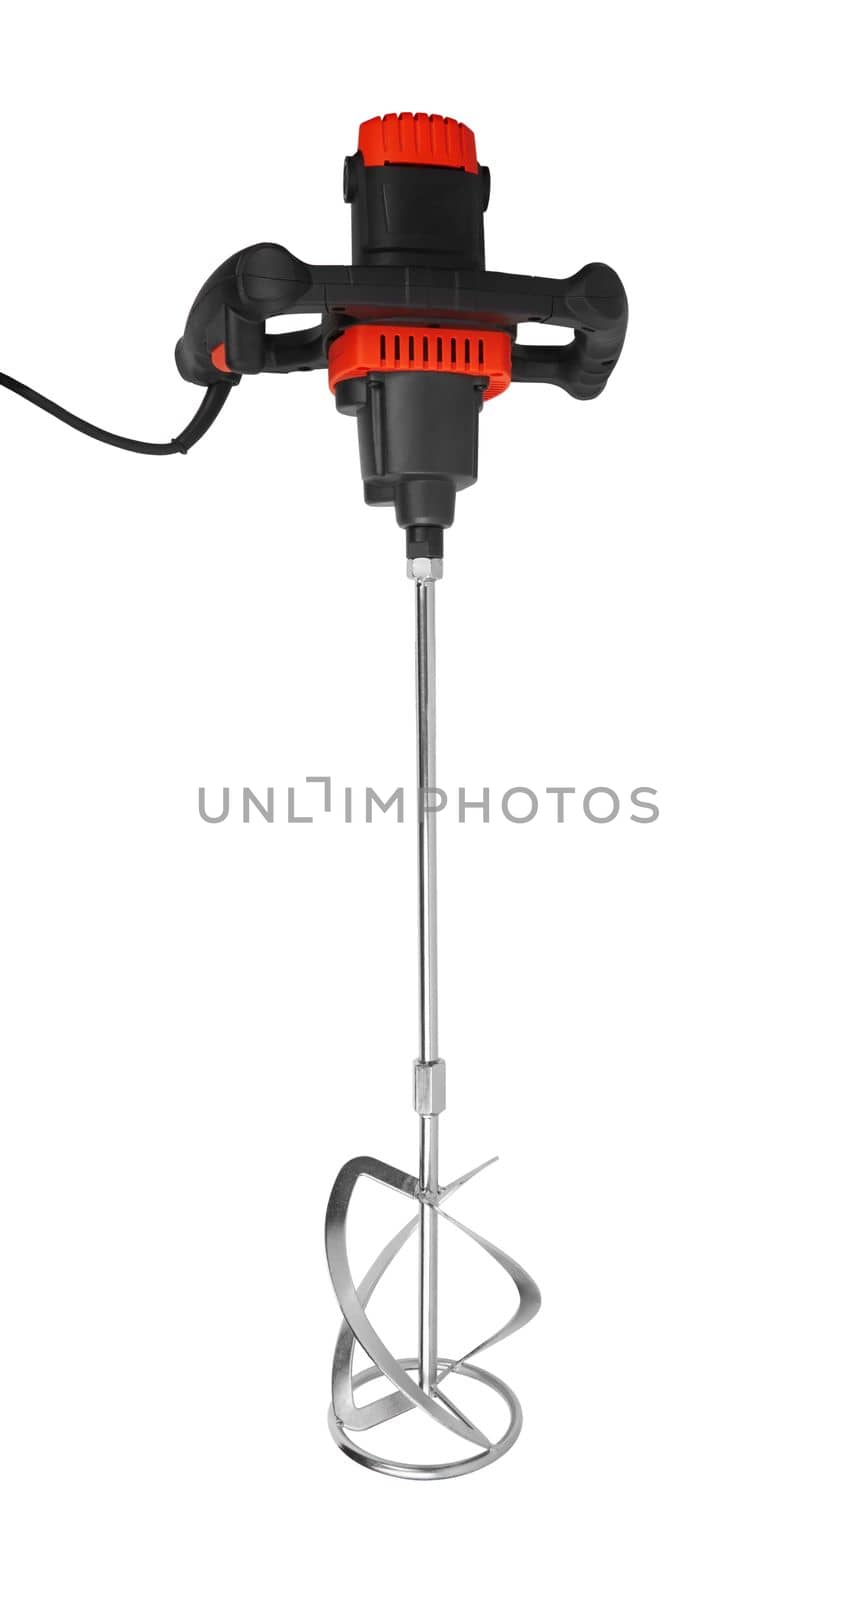 Manual construction mixer isolated on white background